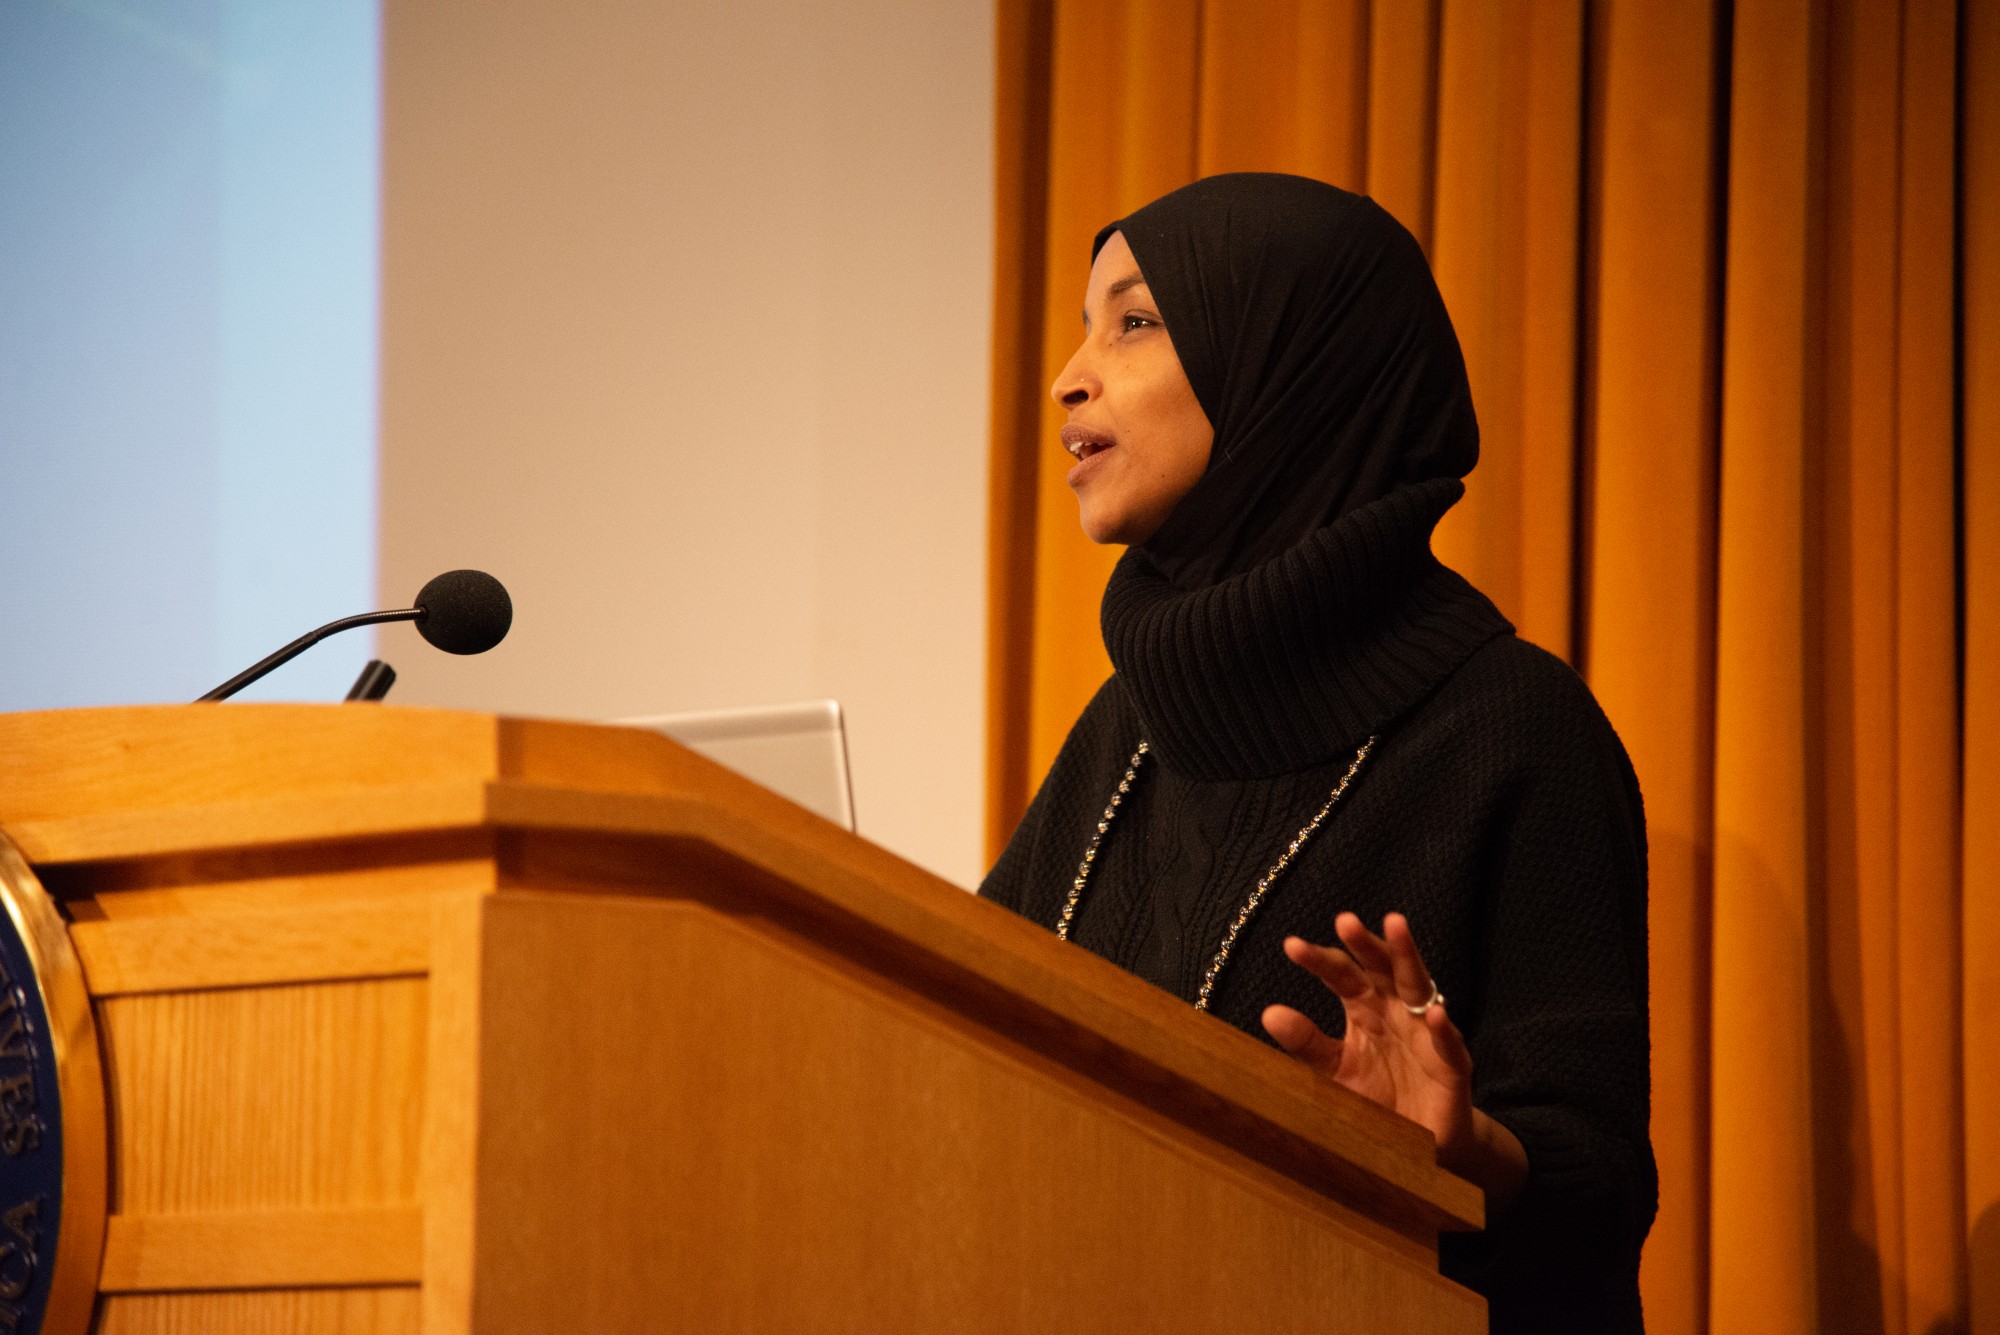 Rep. Ilhan Omar addresses an audience in Cowles Auditorium on Tuesday, Feb. 18. The event centered around her “Pathway to Peace”, a package of seven bills which aim to reorient U.S. foreign policy.